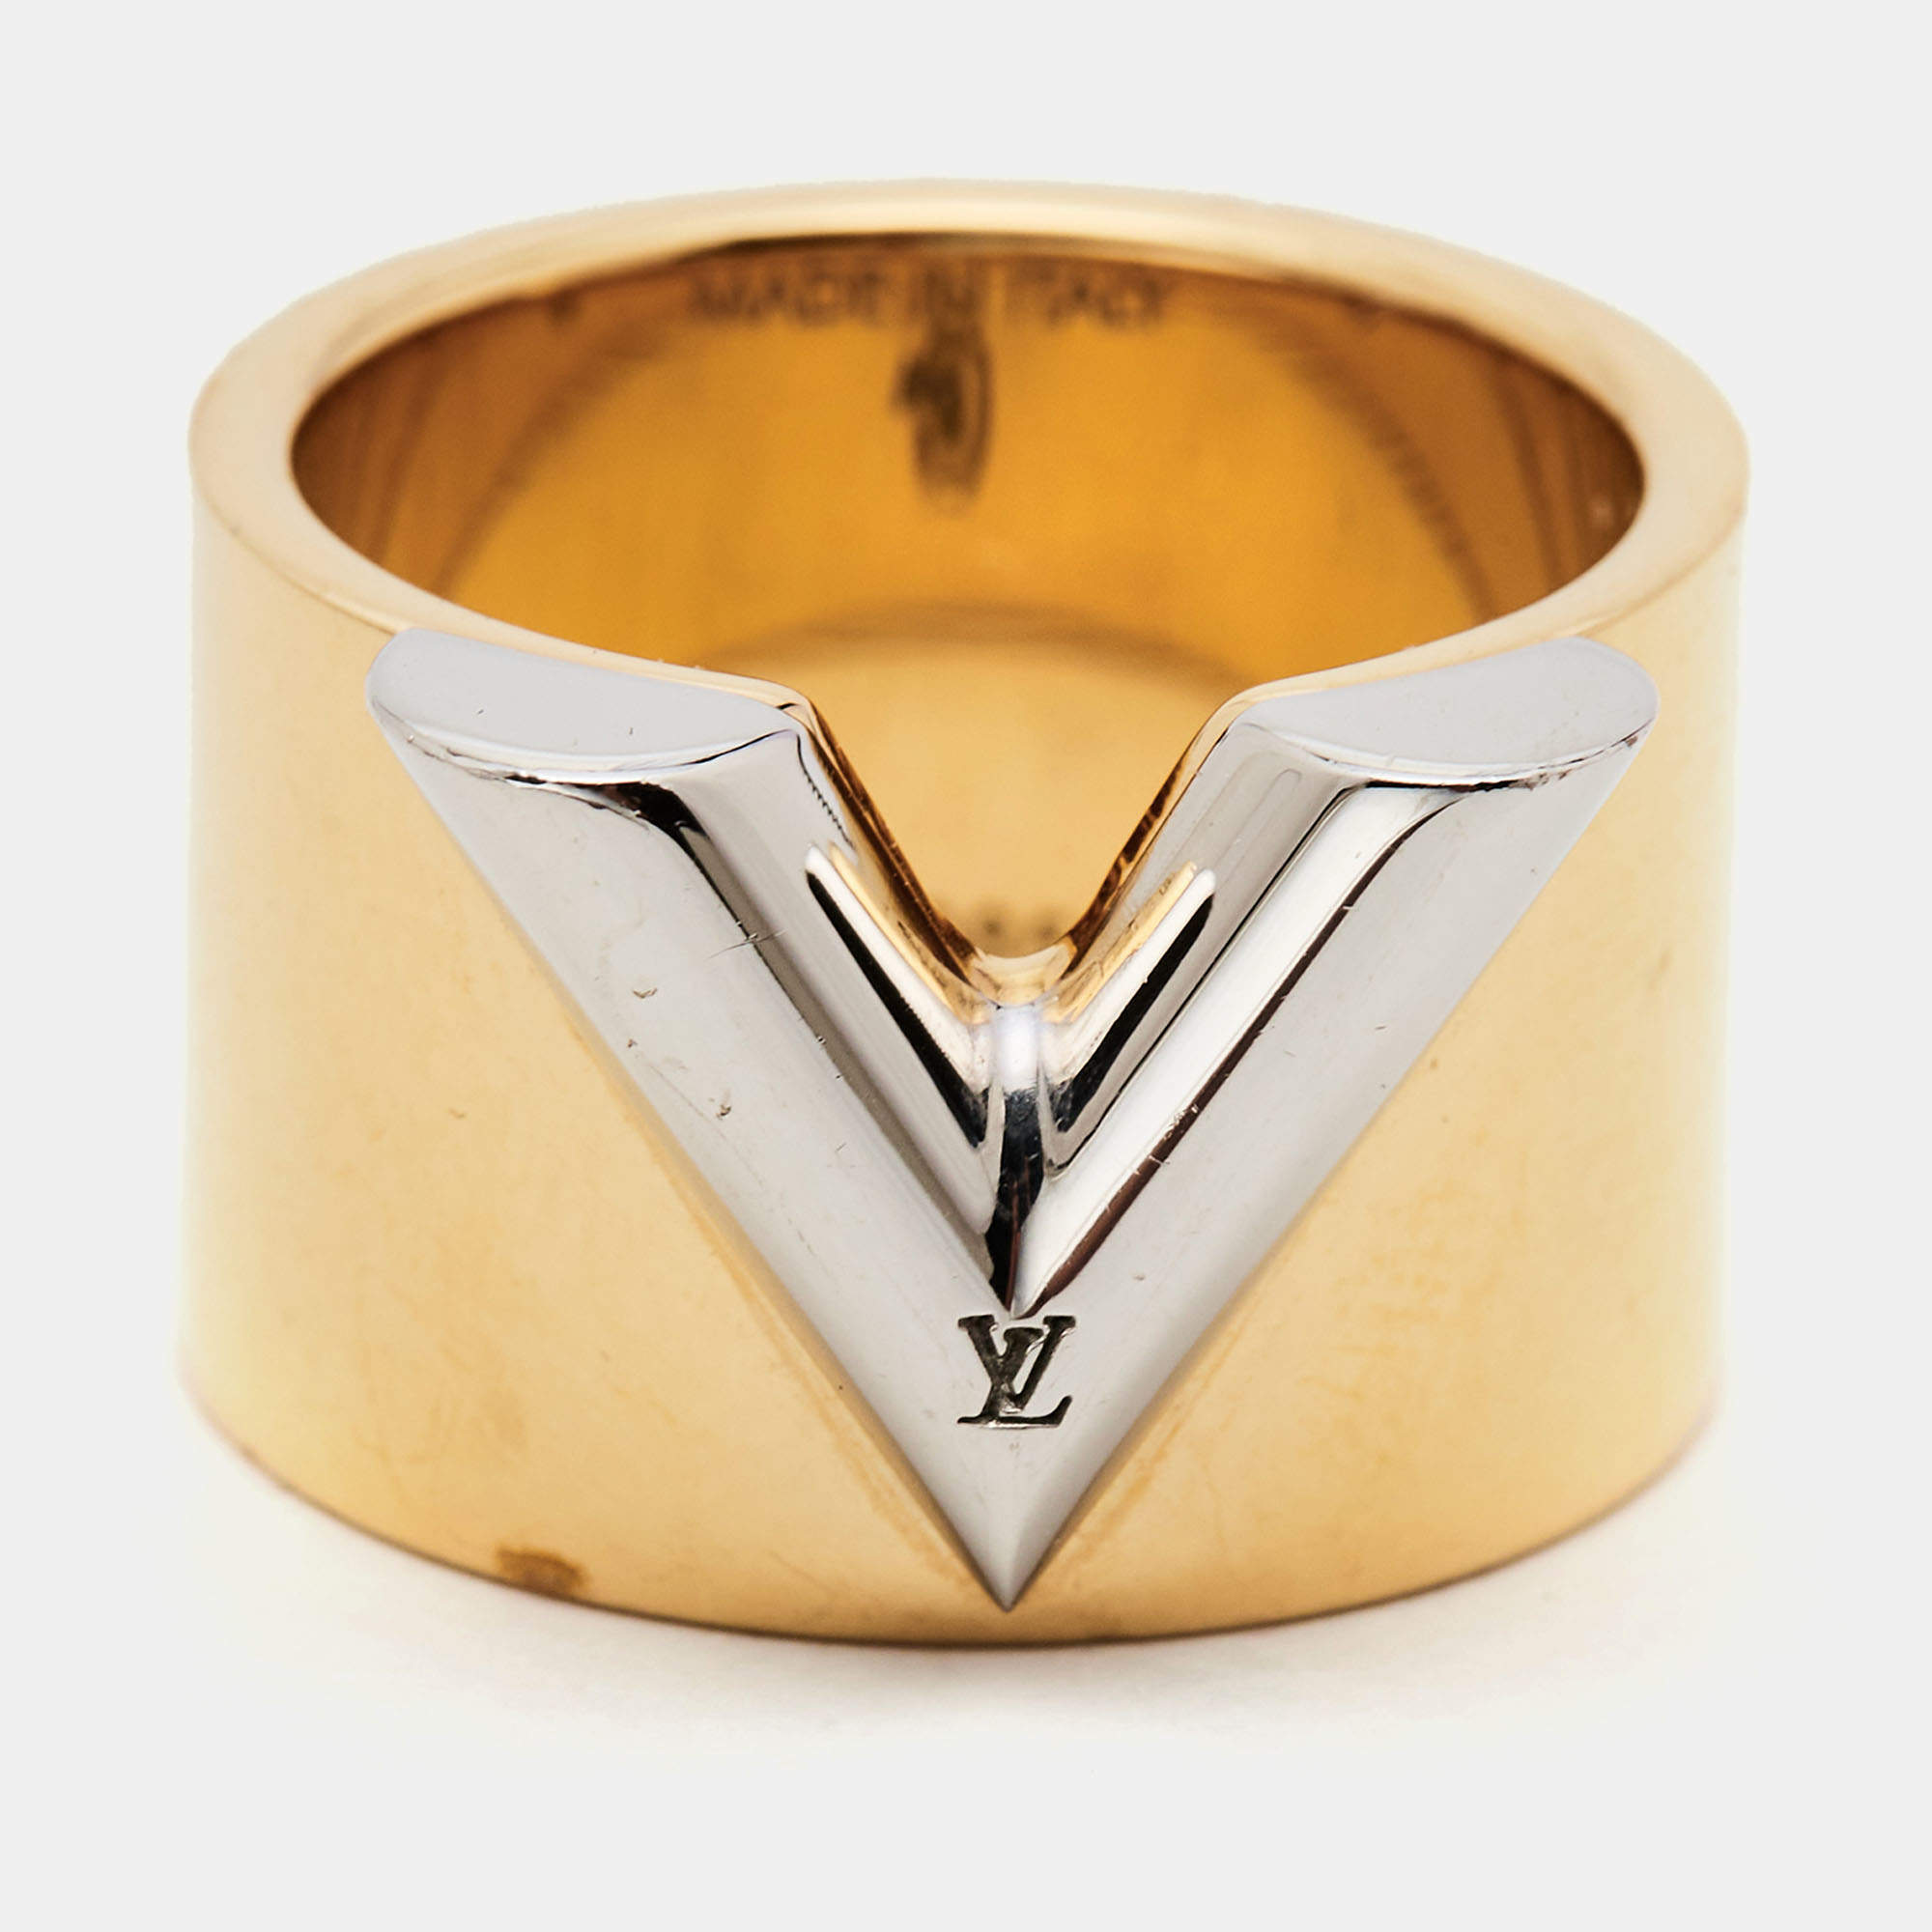 LOUIS VUITTON Essential V Ring gold & silver tones LV RING Sz M AUTHENTIC